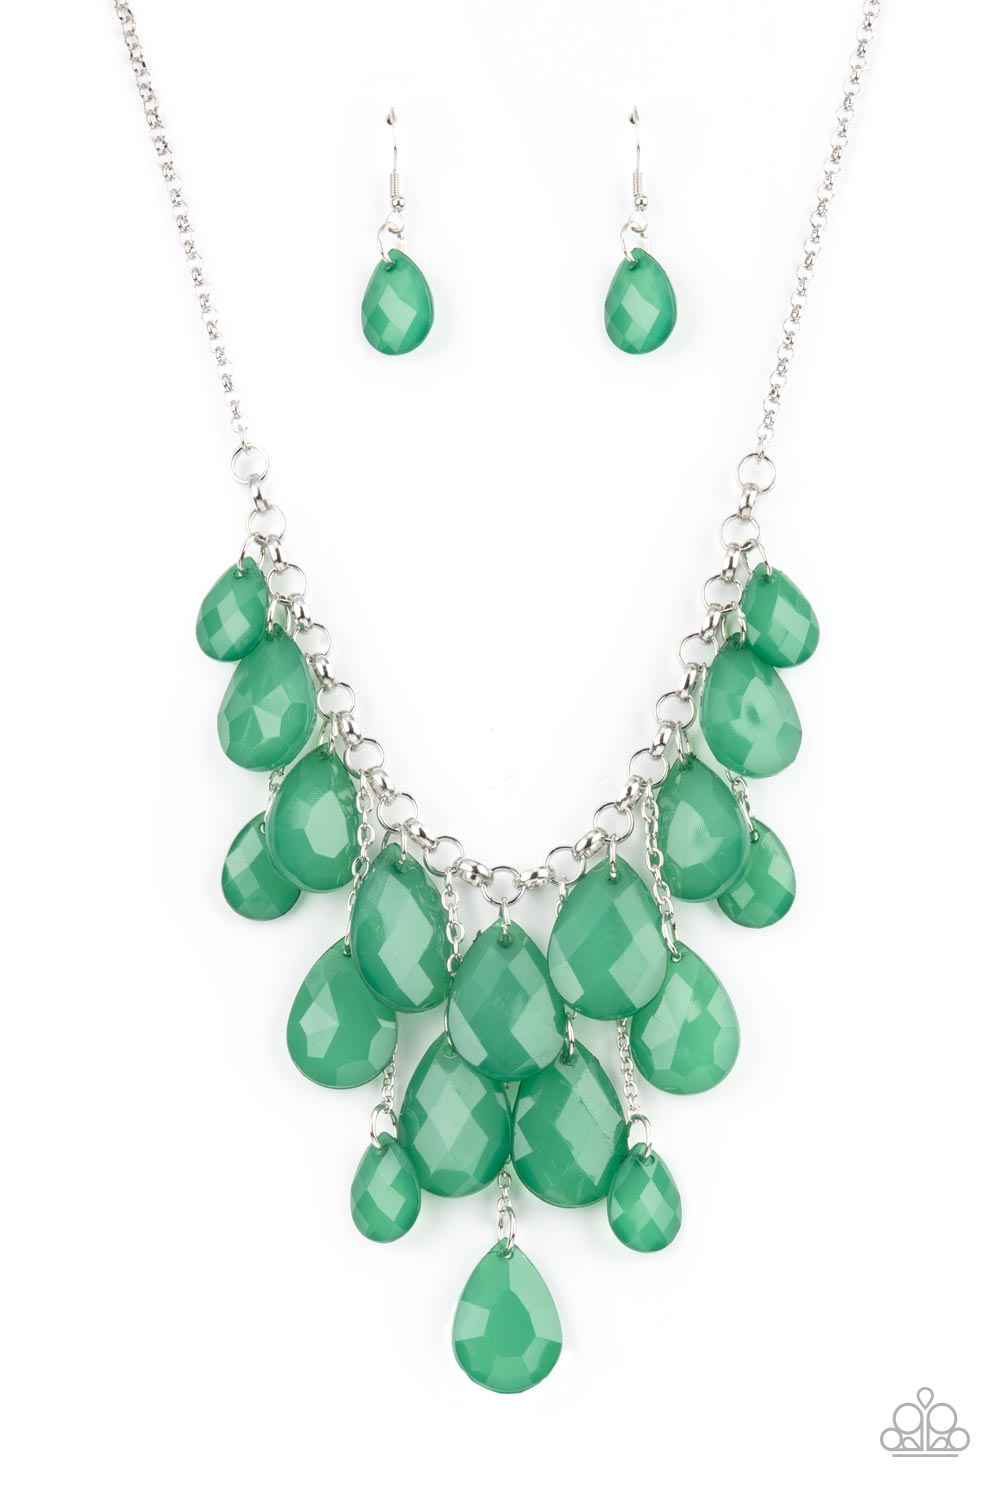 Front Row Flamboyance Green Necklace - Paparazzi Accessories  Varying in size, an opaque collection of faceted Leprechaun teardrops trickle along a chunky silver chain. Infused with dainty silver chains, additional teardrop beads swing from the effervescent fringe at varying lengths for a glamorous finish. Features an adjustable clasp closure.  Sold as one individual necklace. Includes one pair of matching earrings.